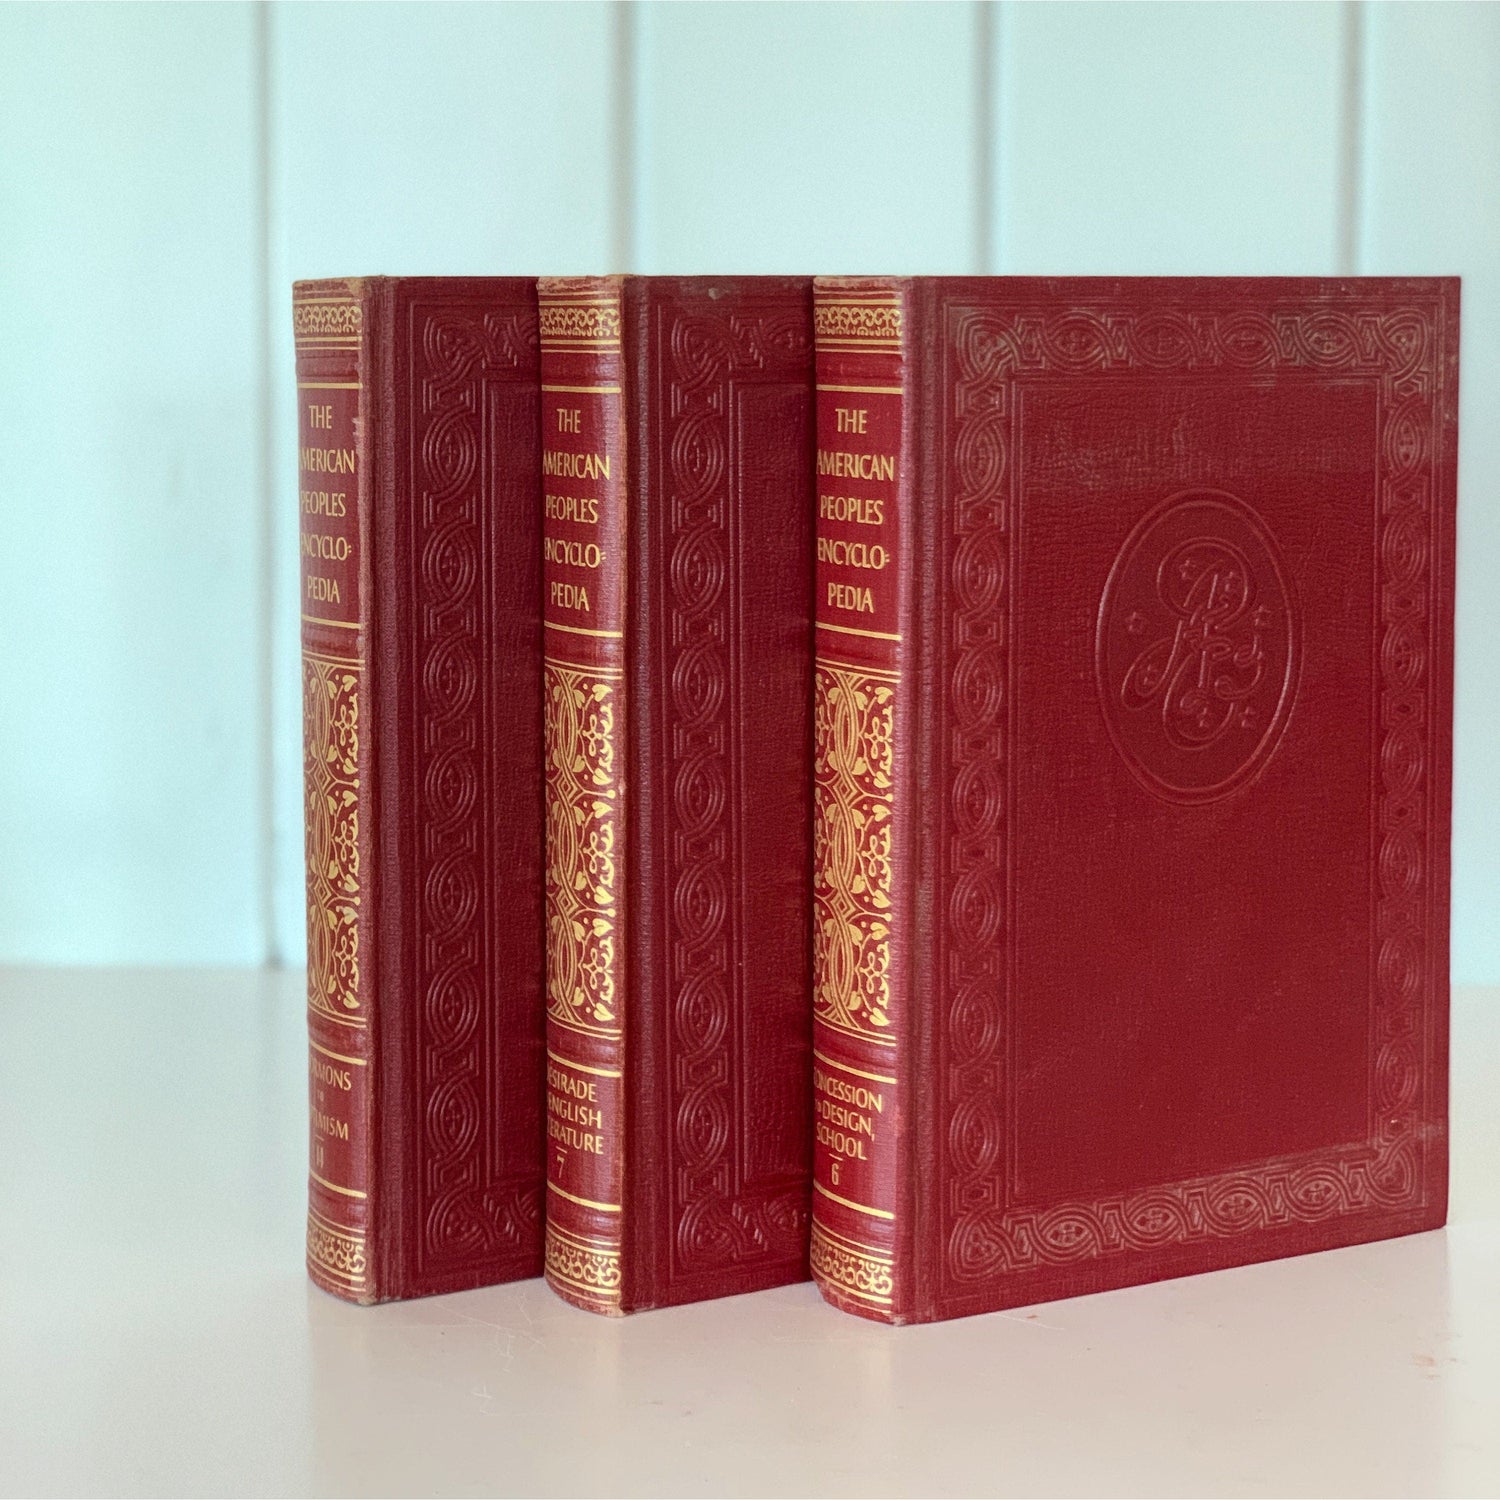 Vintage Red and Gold Ornate Books, The American People’s Encyclopedia, 1951